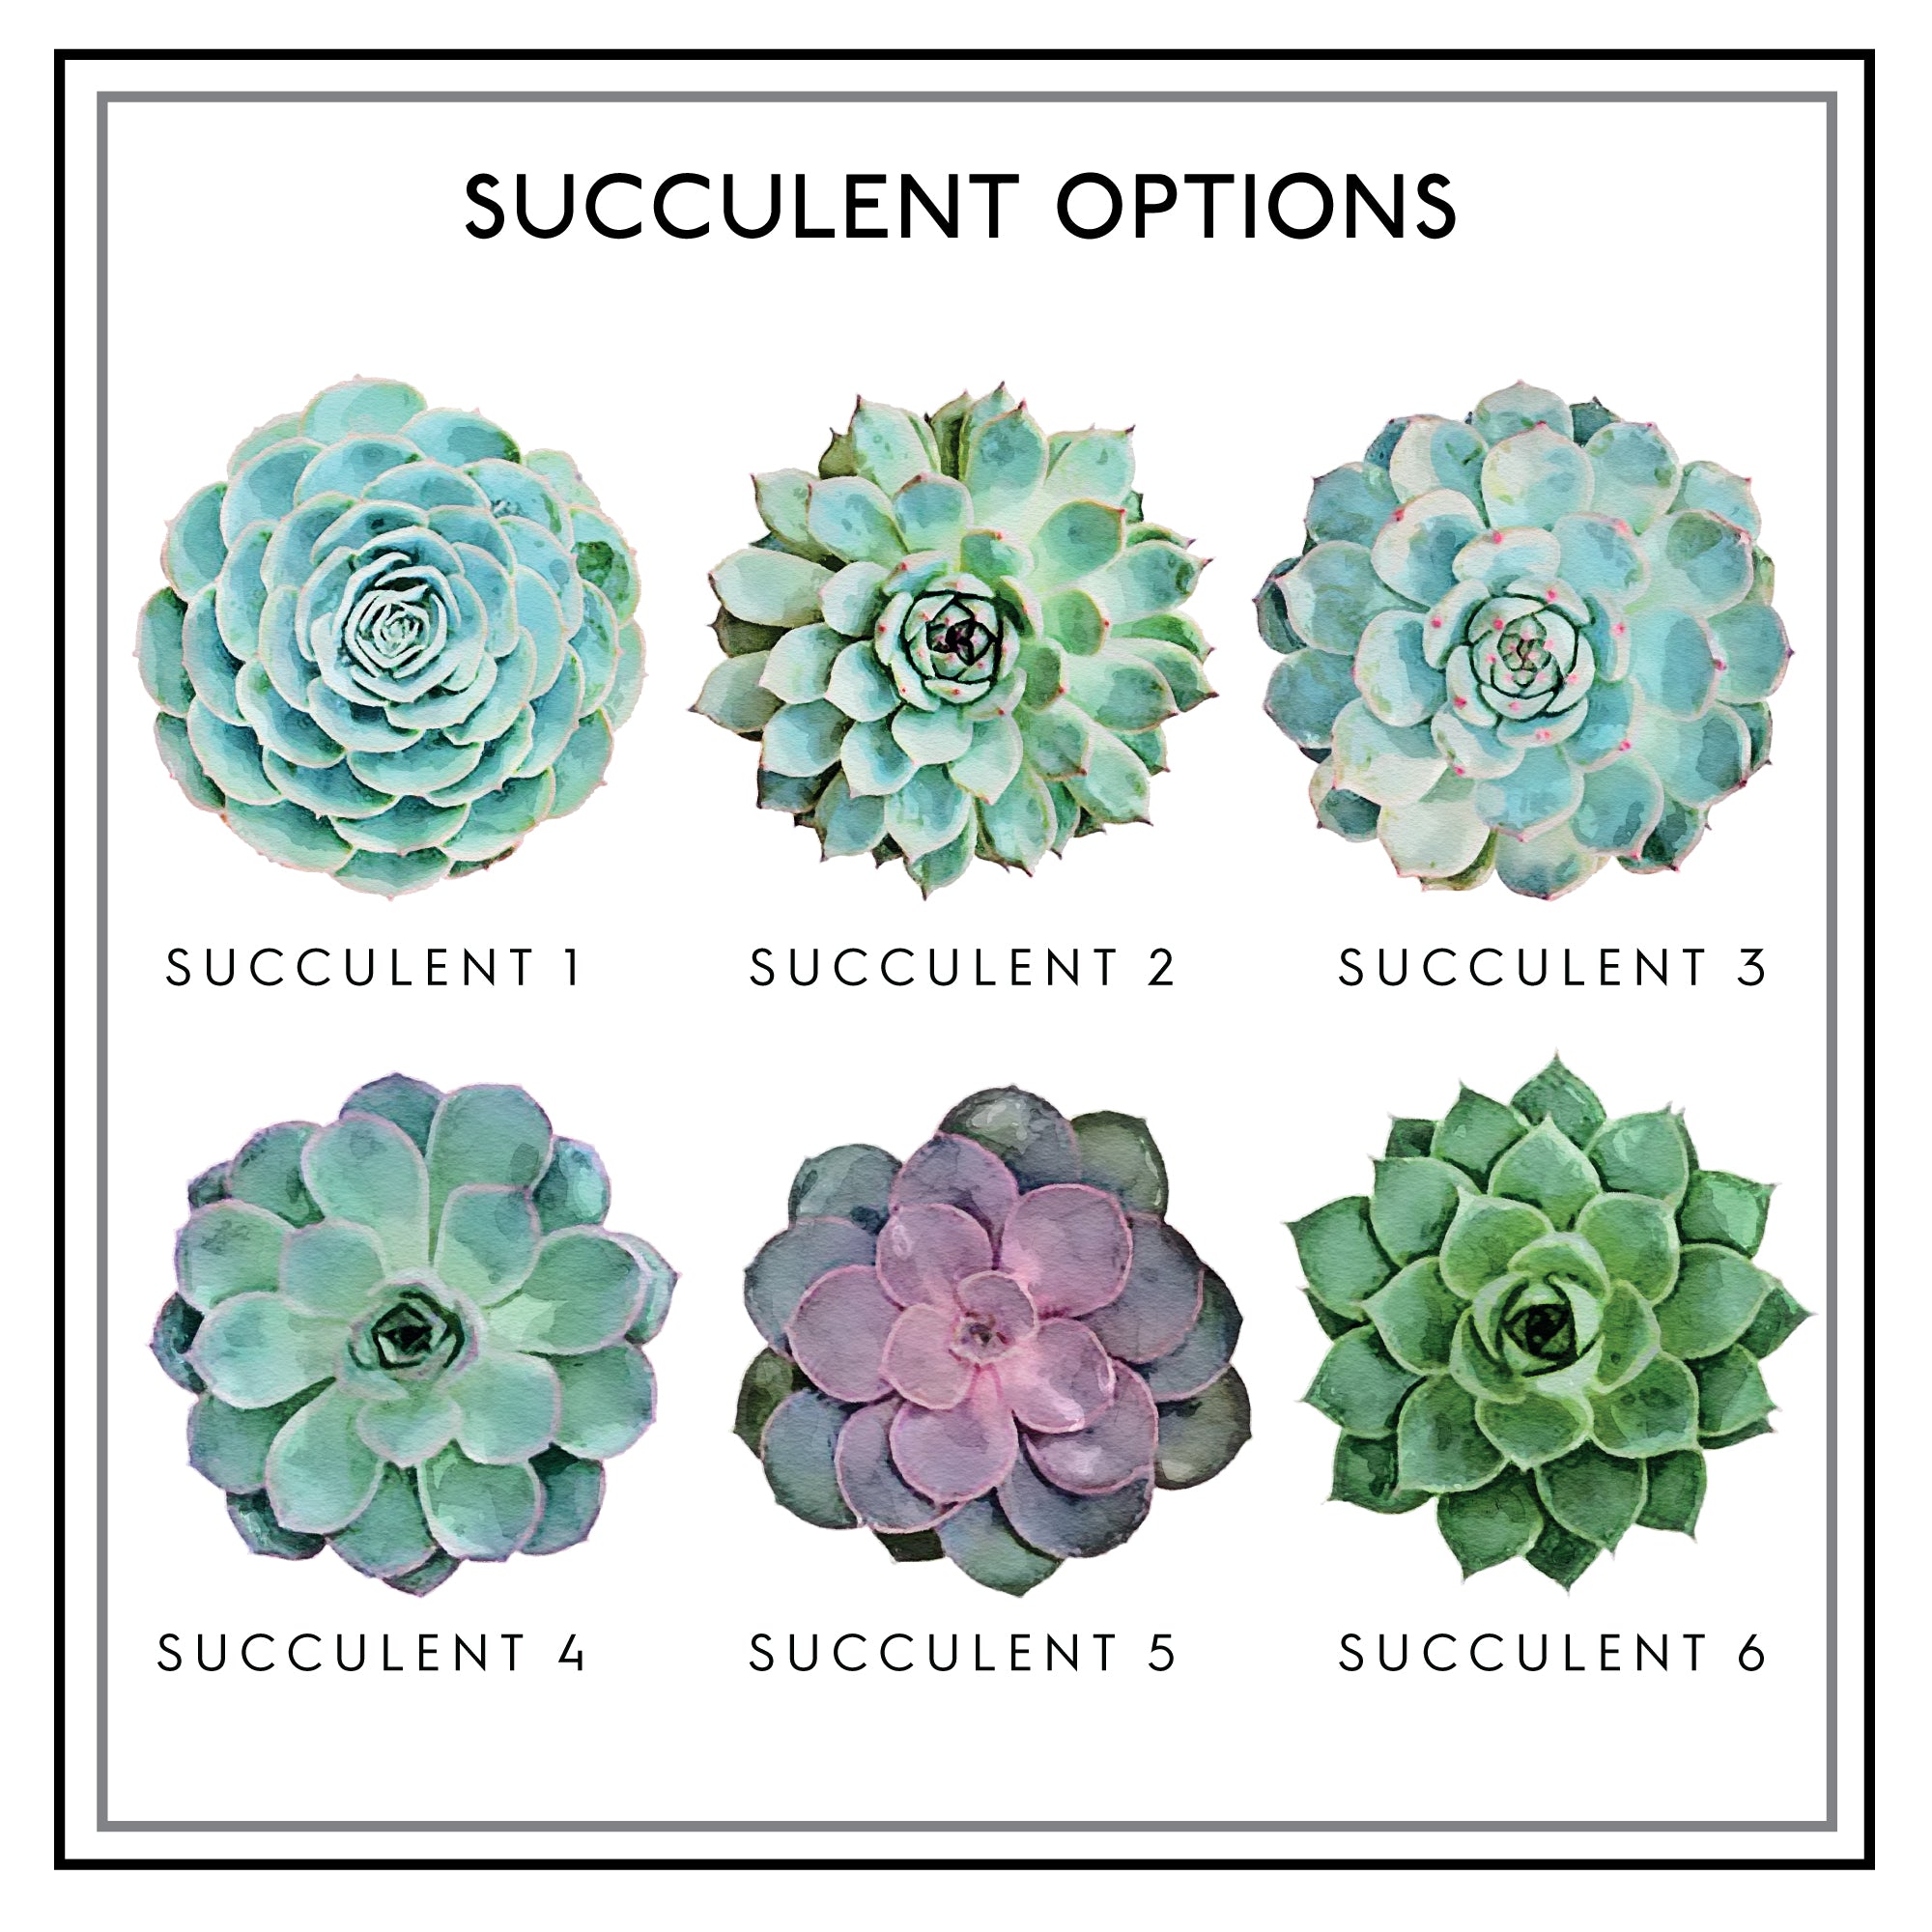 Swatch showing different plant options available